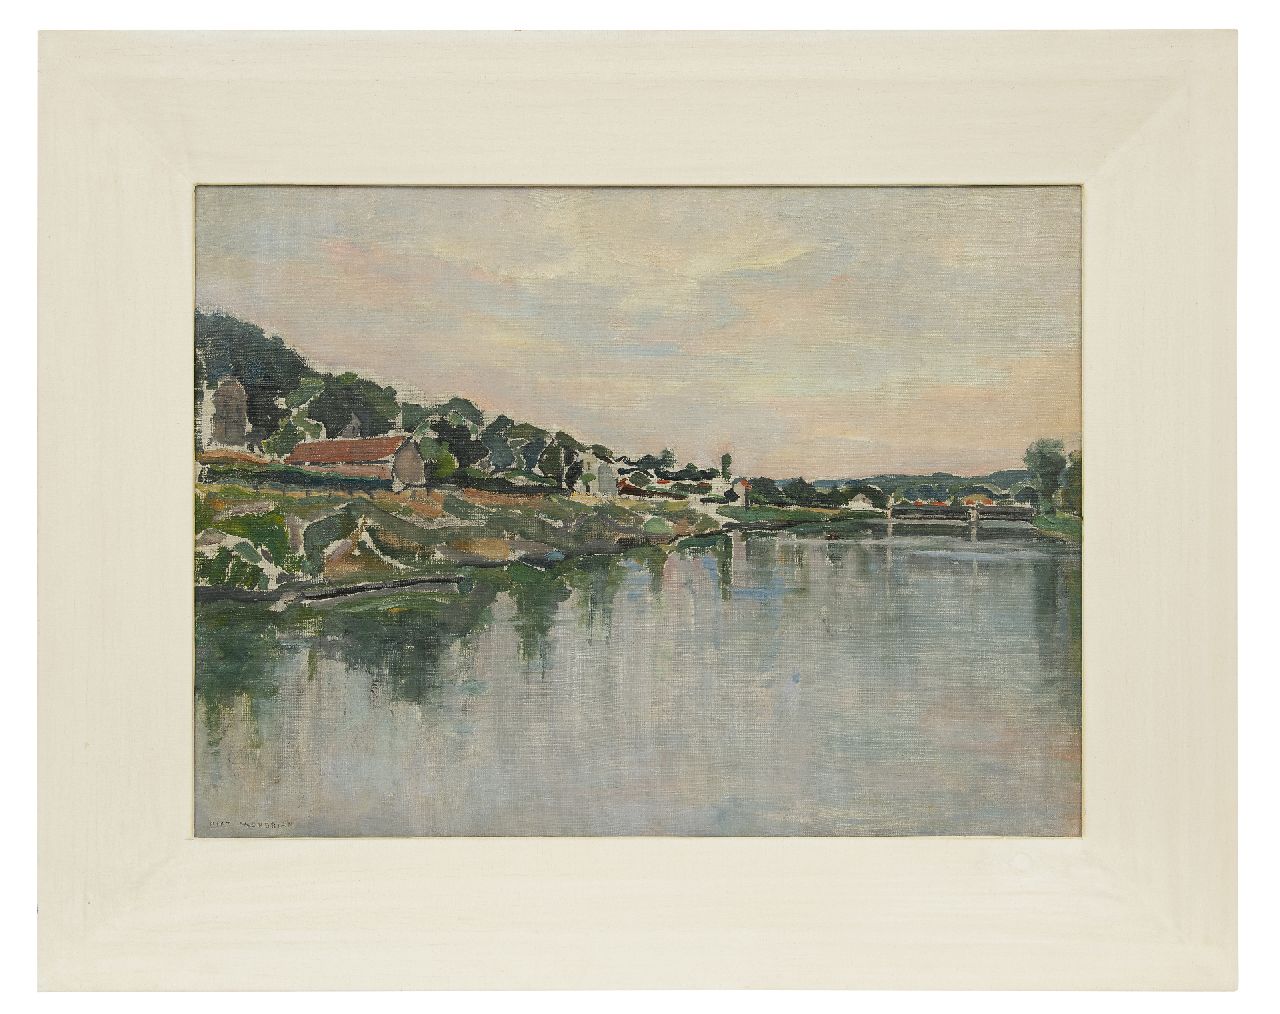 Mondriaan P.C.  | Pieter Cornelis 'Piet' Mondriaan | Paintings offered for sale | View of the river Seine, oil on canvas 54.2 x 73.1 cm, signed l.l. and painted in 1931